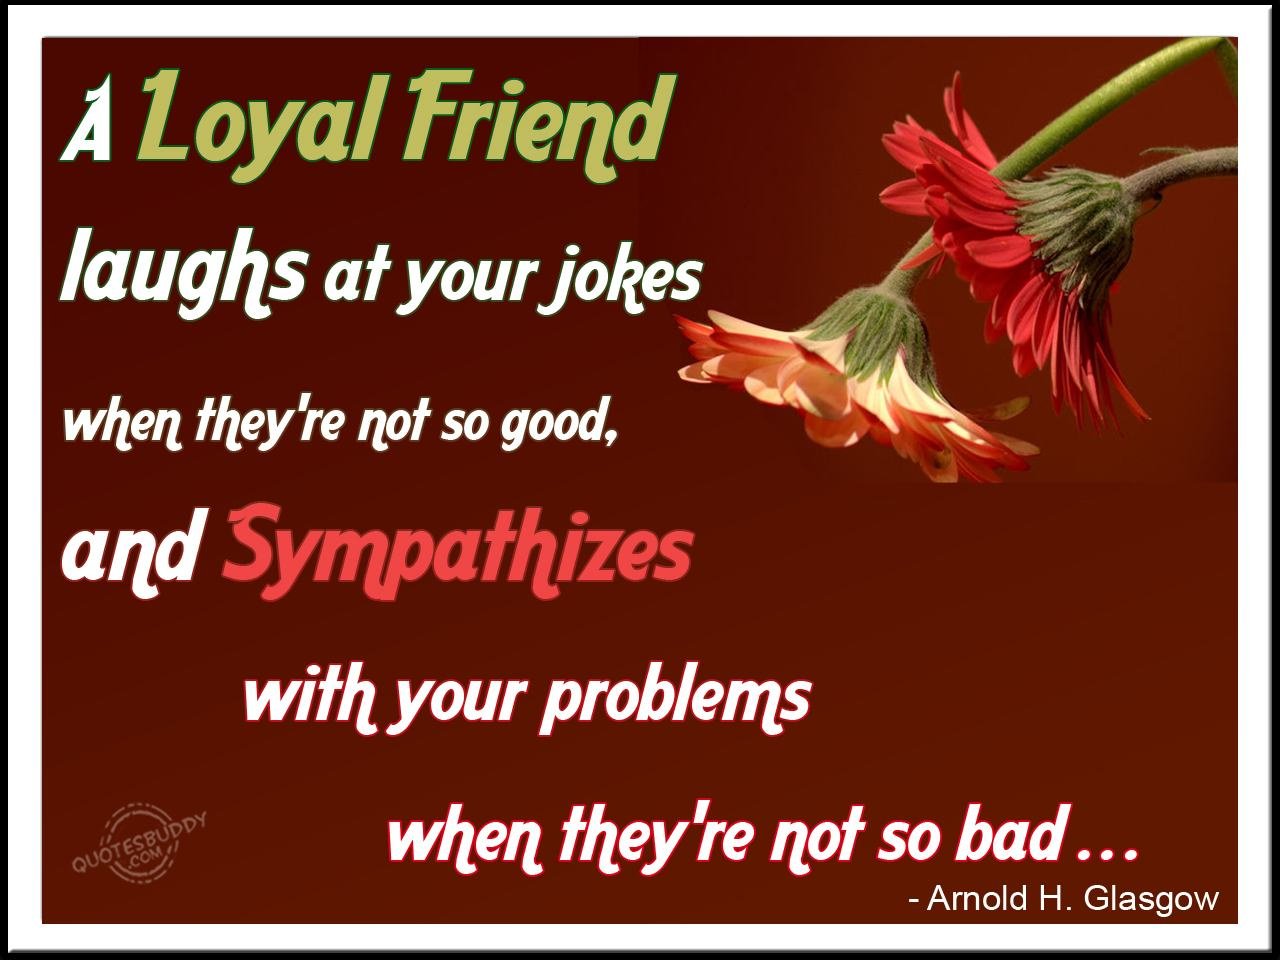 Friendship Quotes Funny Jokes - Daily Quotes